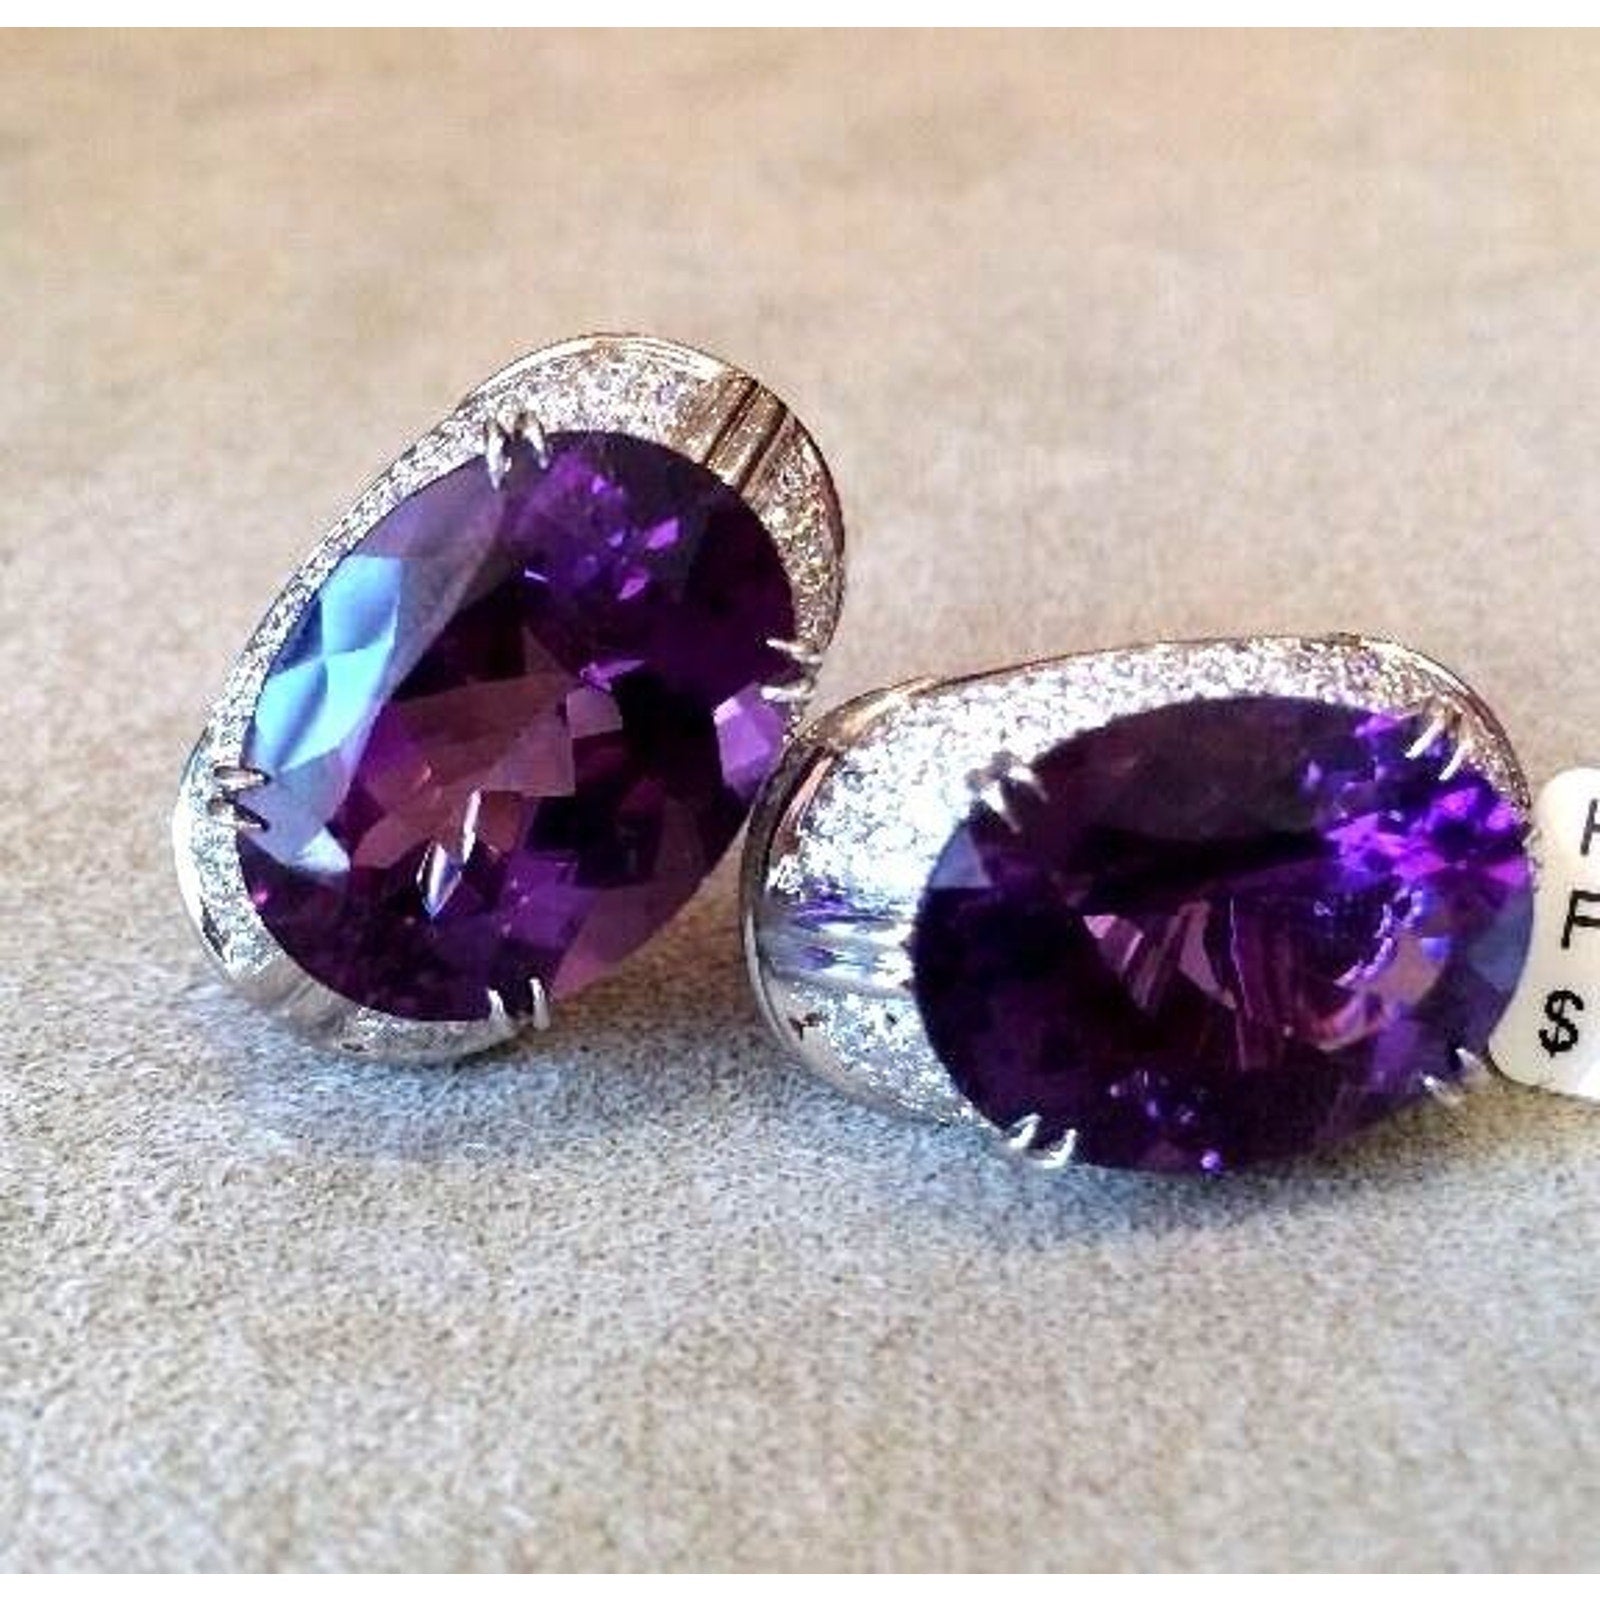 37.26 carat Oval Amethyst and Pave Diamond Earrings in 18K White Gold